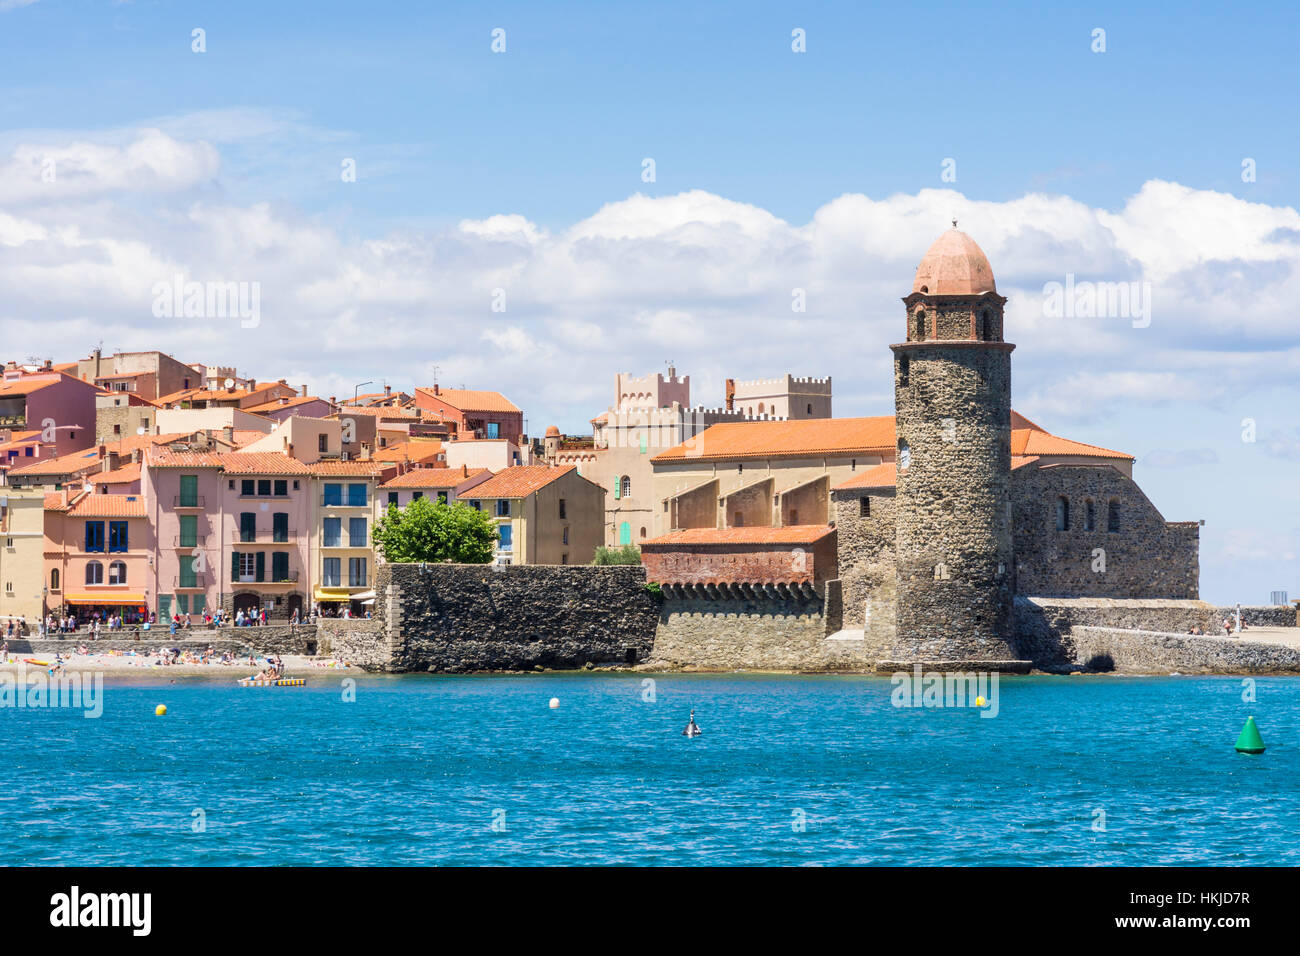 Views of the old town and the bell tower and Church of Notre Dame des Anges, Collioure, Côte Vermeille, France Stock Photo